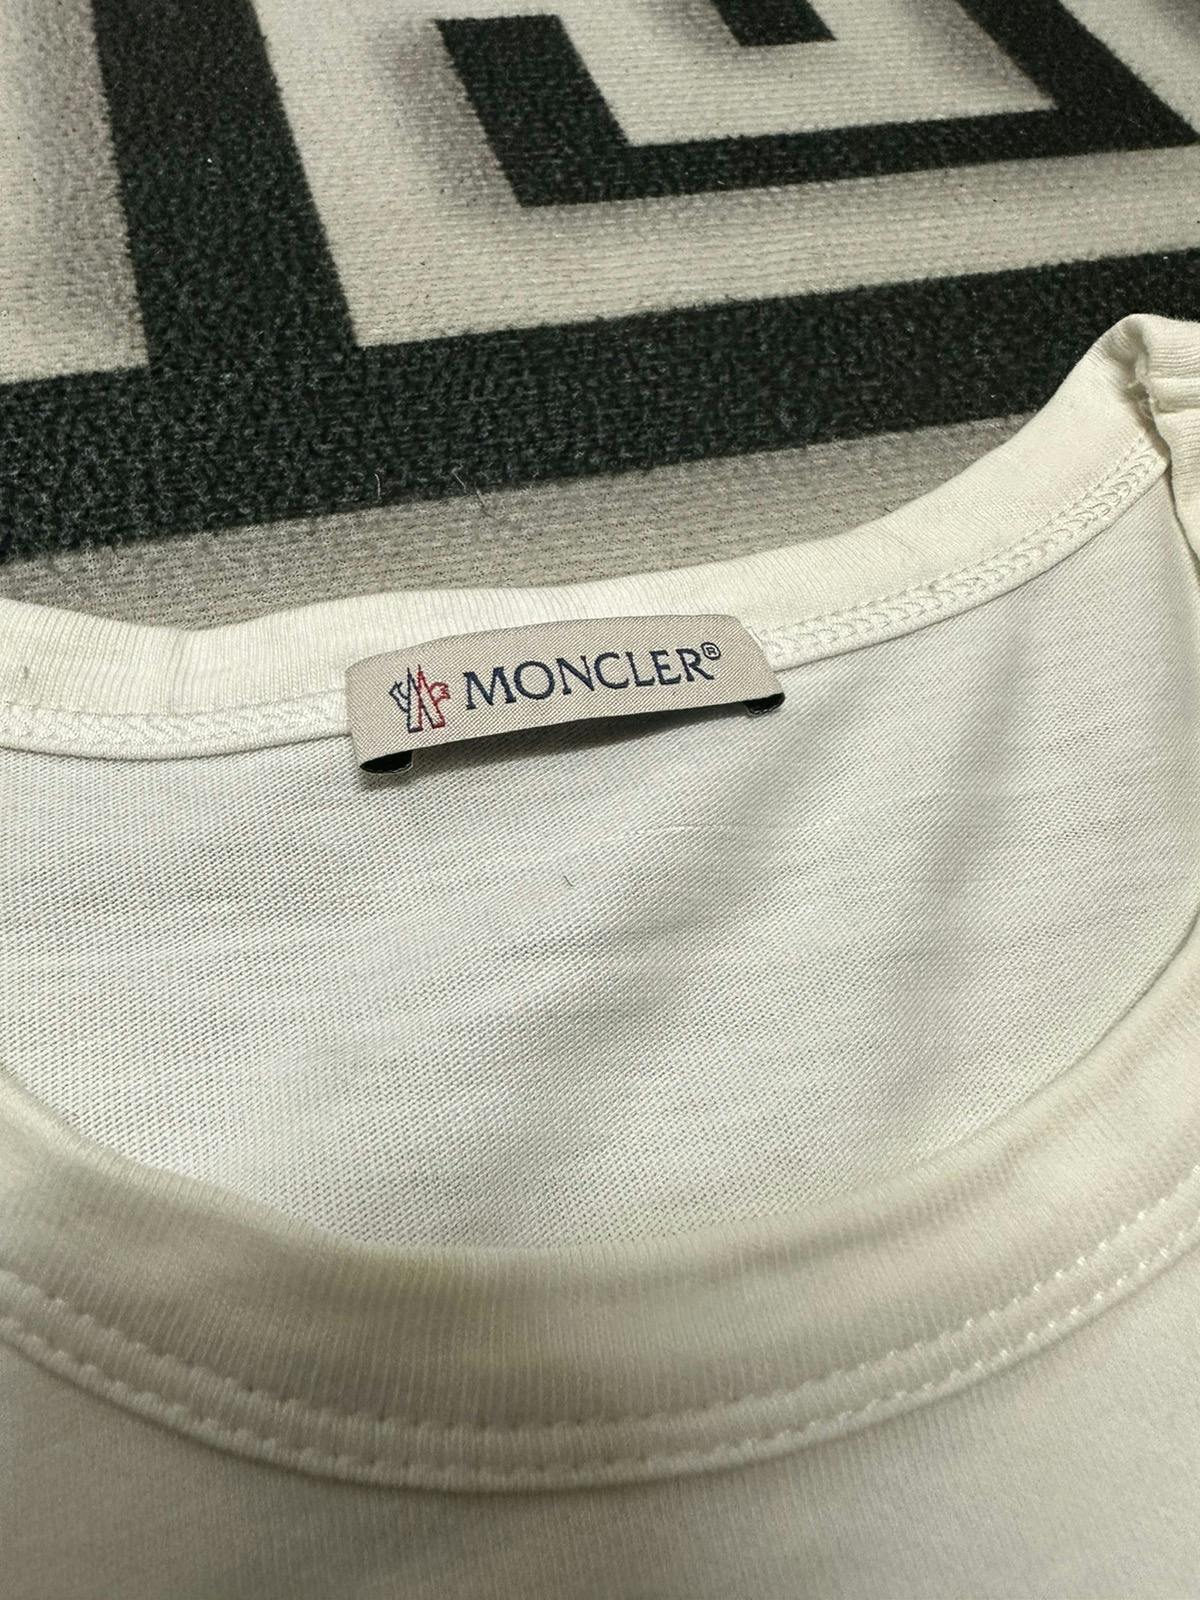 Moncler spellout tee - 3